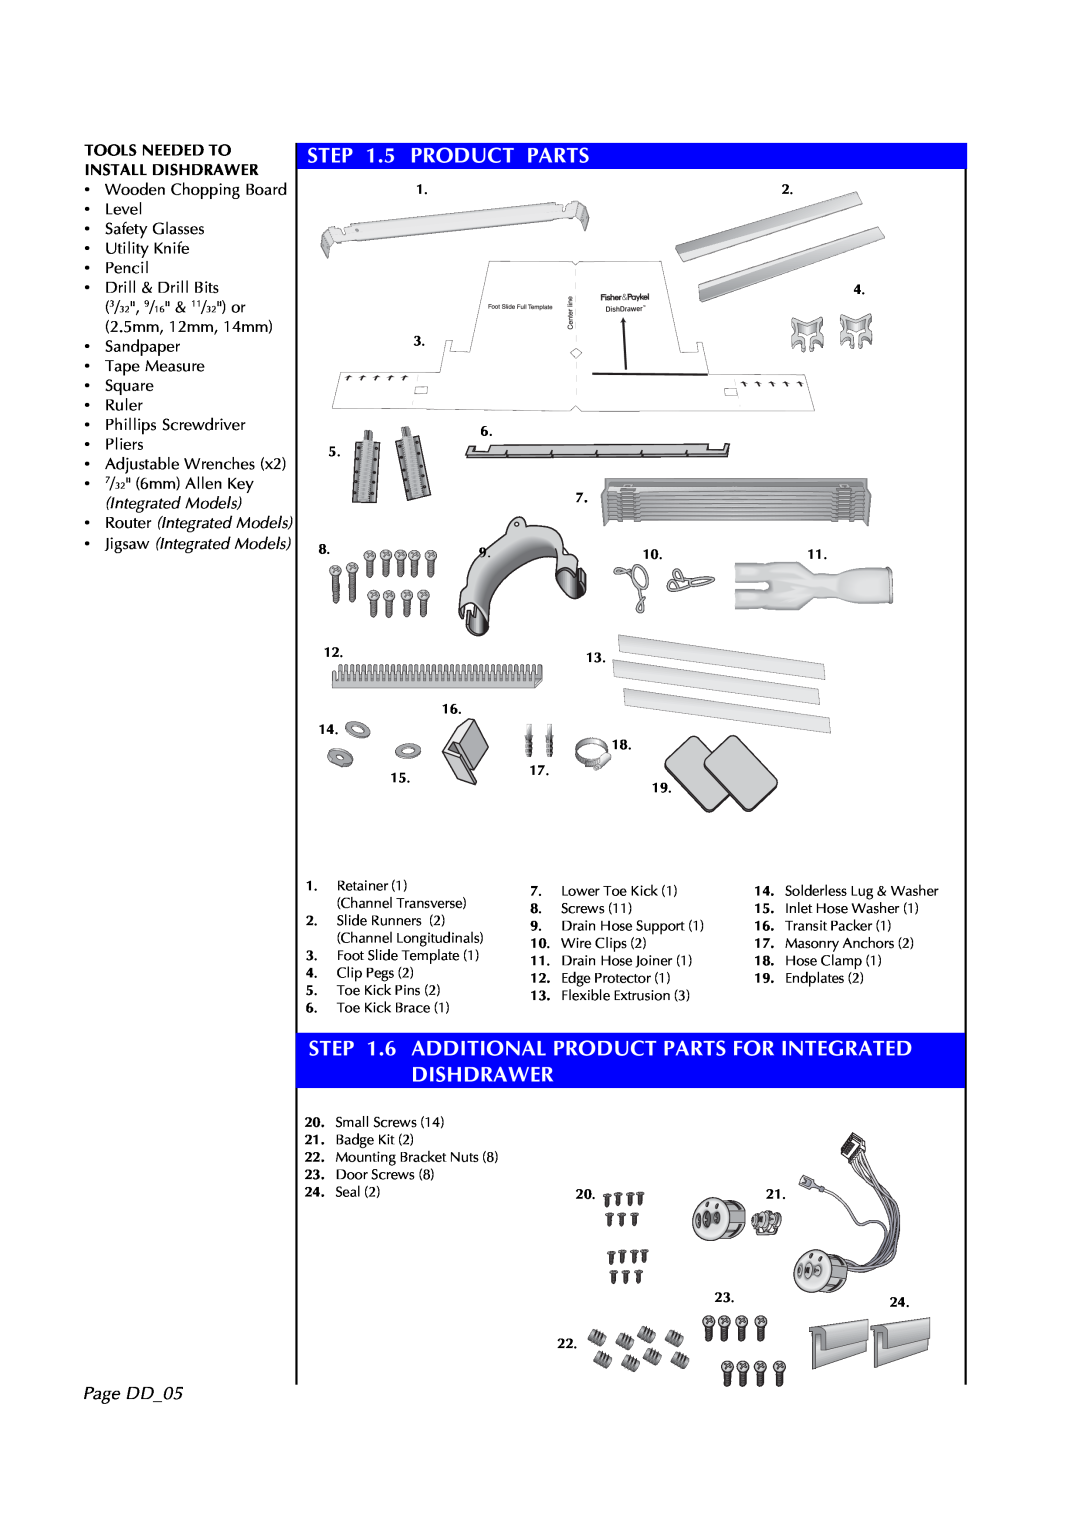 Fisher & Paykel DD602 5 PRODUCT PARTS, 6 ADDITIONAL PRODUCT PARTS FOR INTEGRATED, Dishdrawer, Page DD05, Integrated Models 